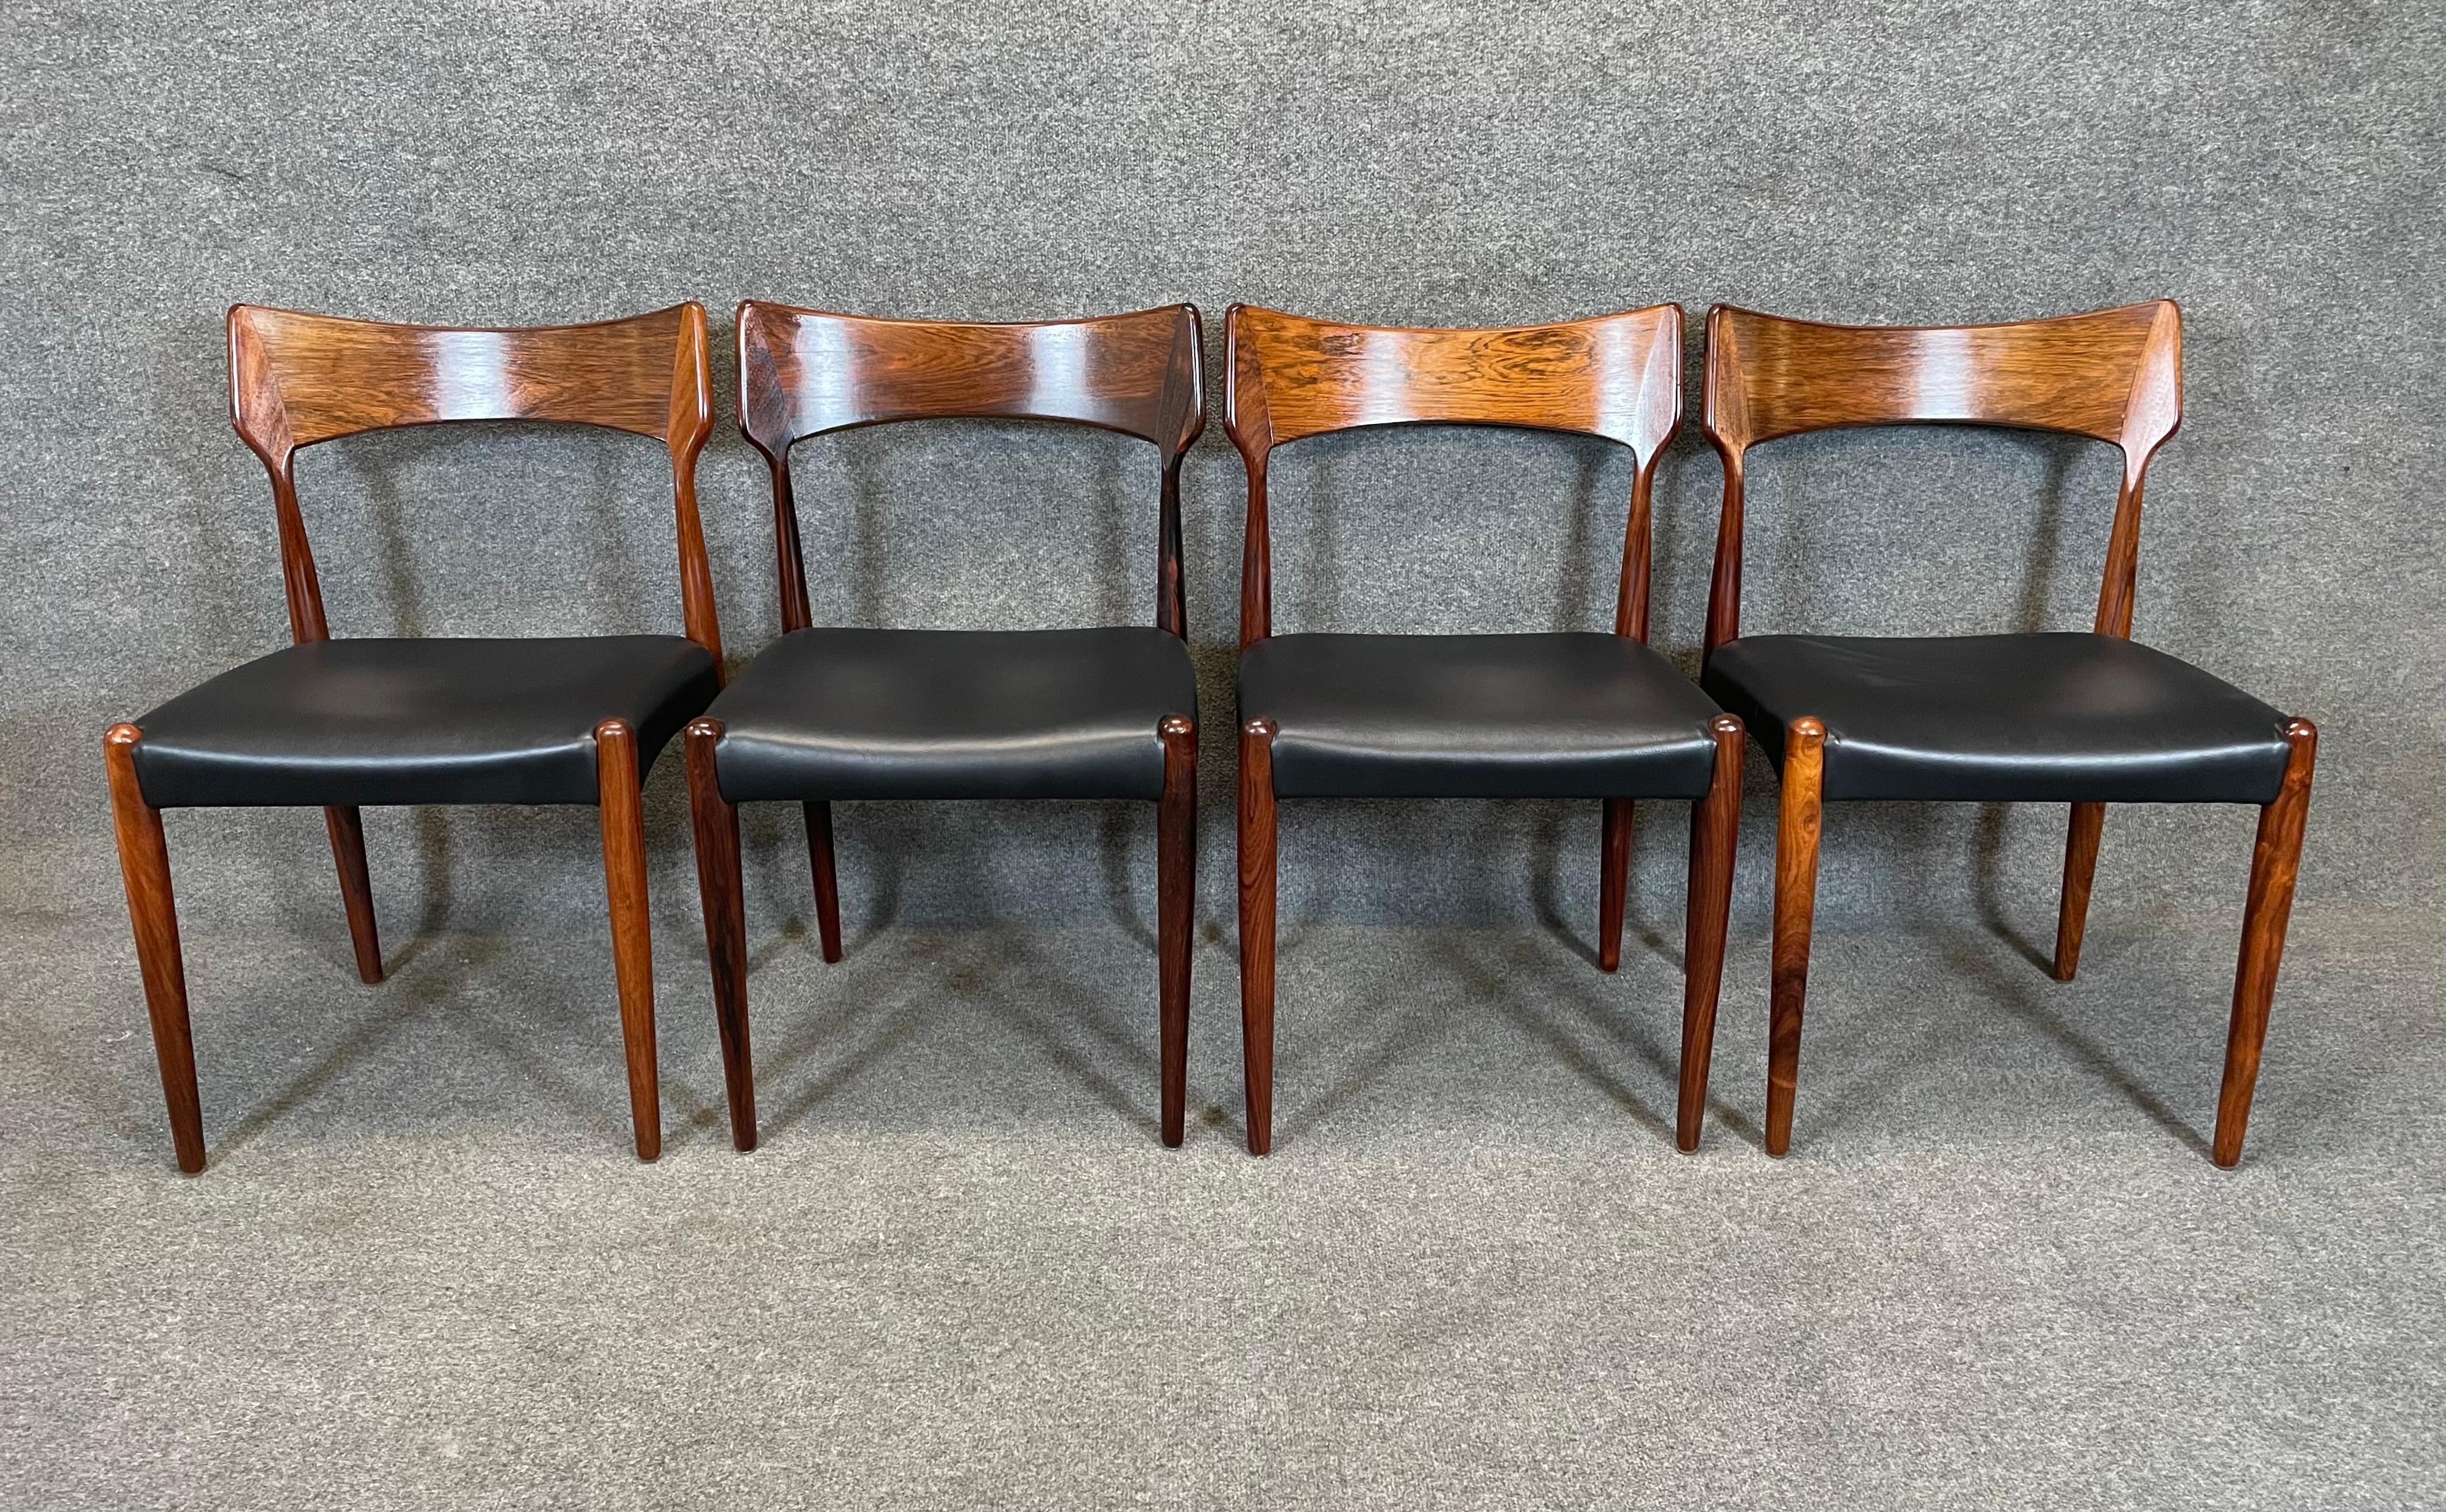 Here is a beautiful set of 4 scandinavian modern dining chairs in rosewood manufactured by Bernhard Pedersen in Denmark in the 1960's.
This exquisite set, recently imported from Europe to California before its refinishing, features a solid